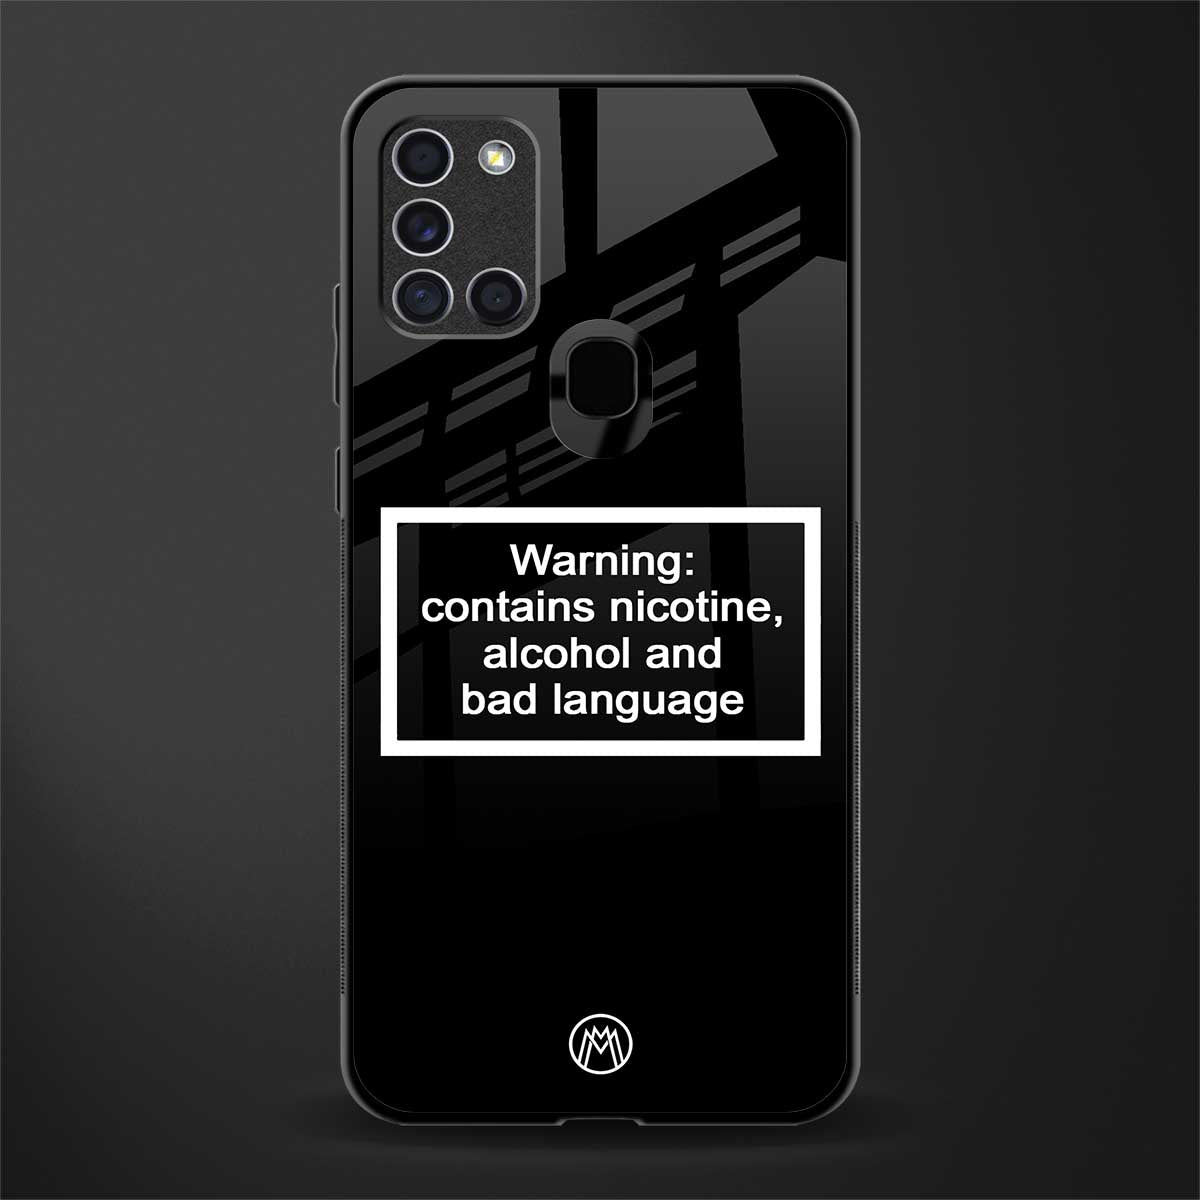 warning sign black edition glass case for samsung galaxy a21s image